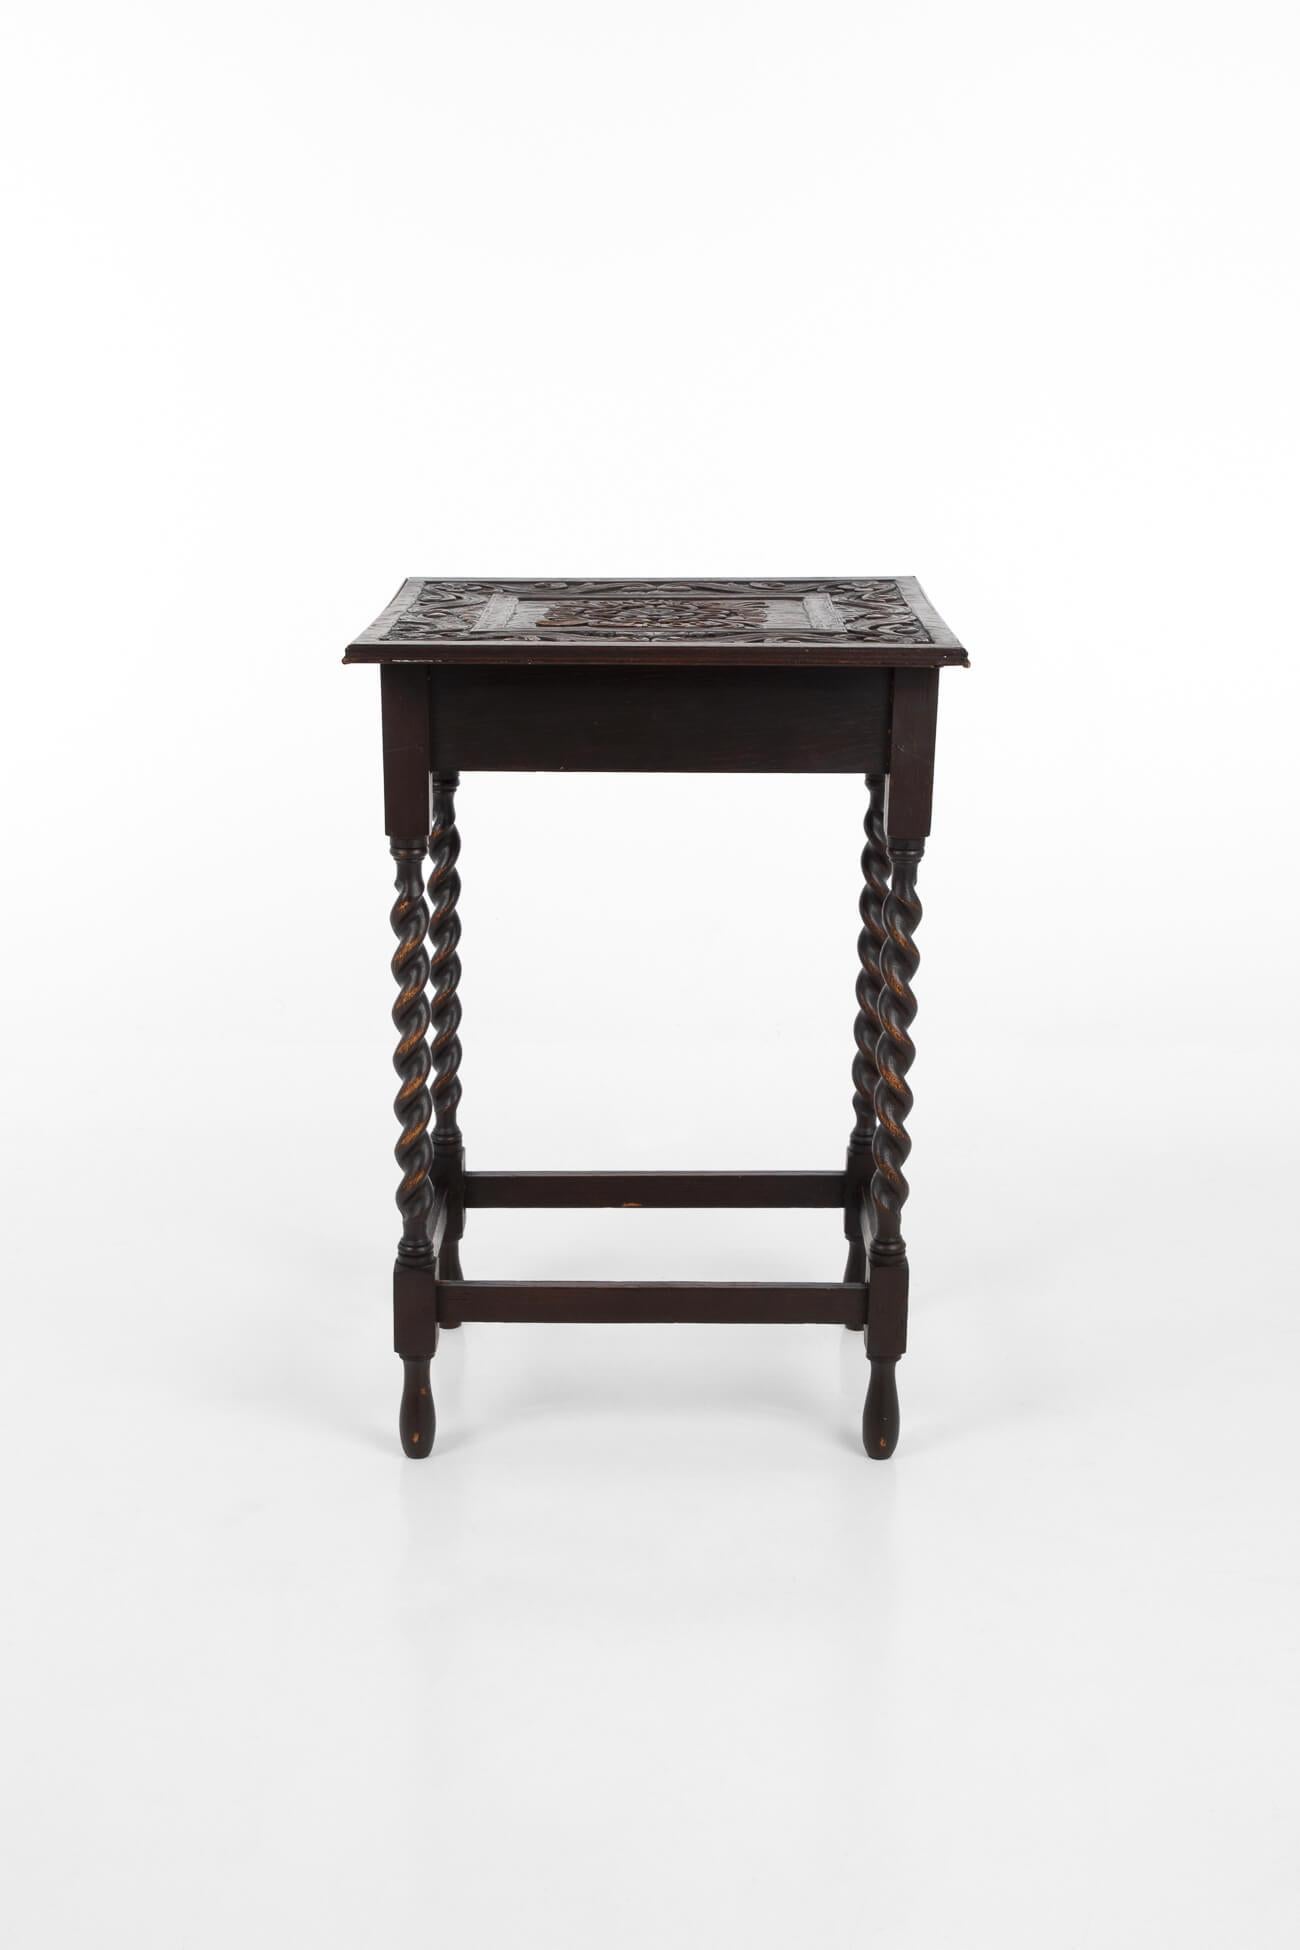 British Colonial Early 20th Century Welsh Barley Twist Occasional Table, circa 1918 For Sale